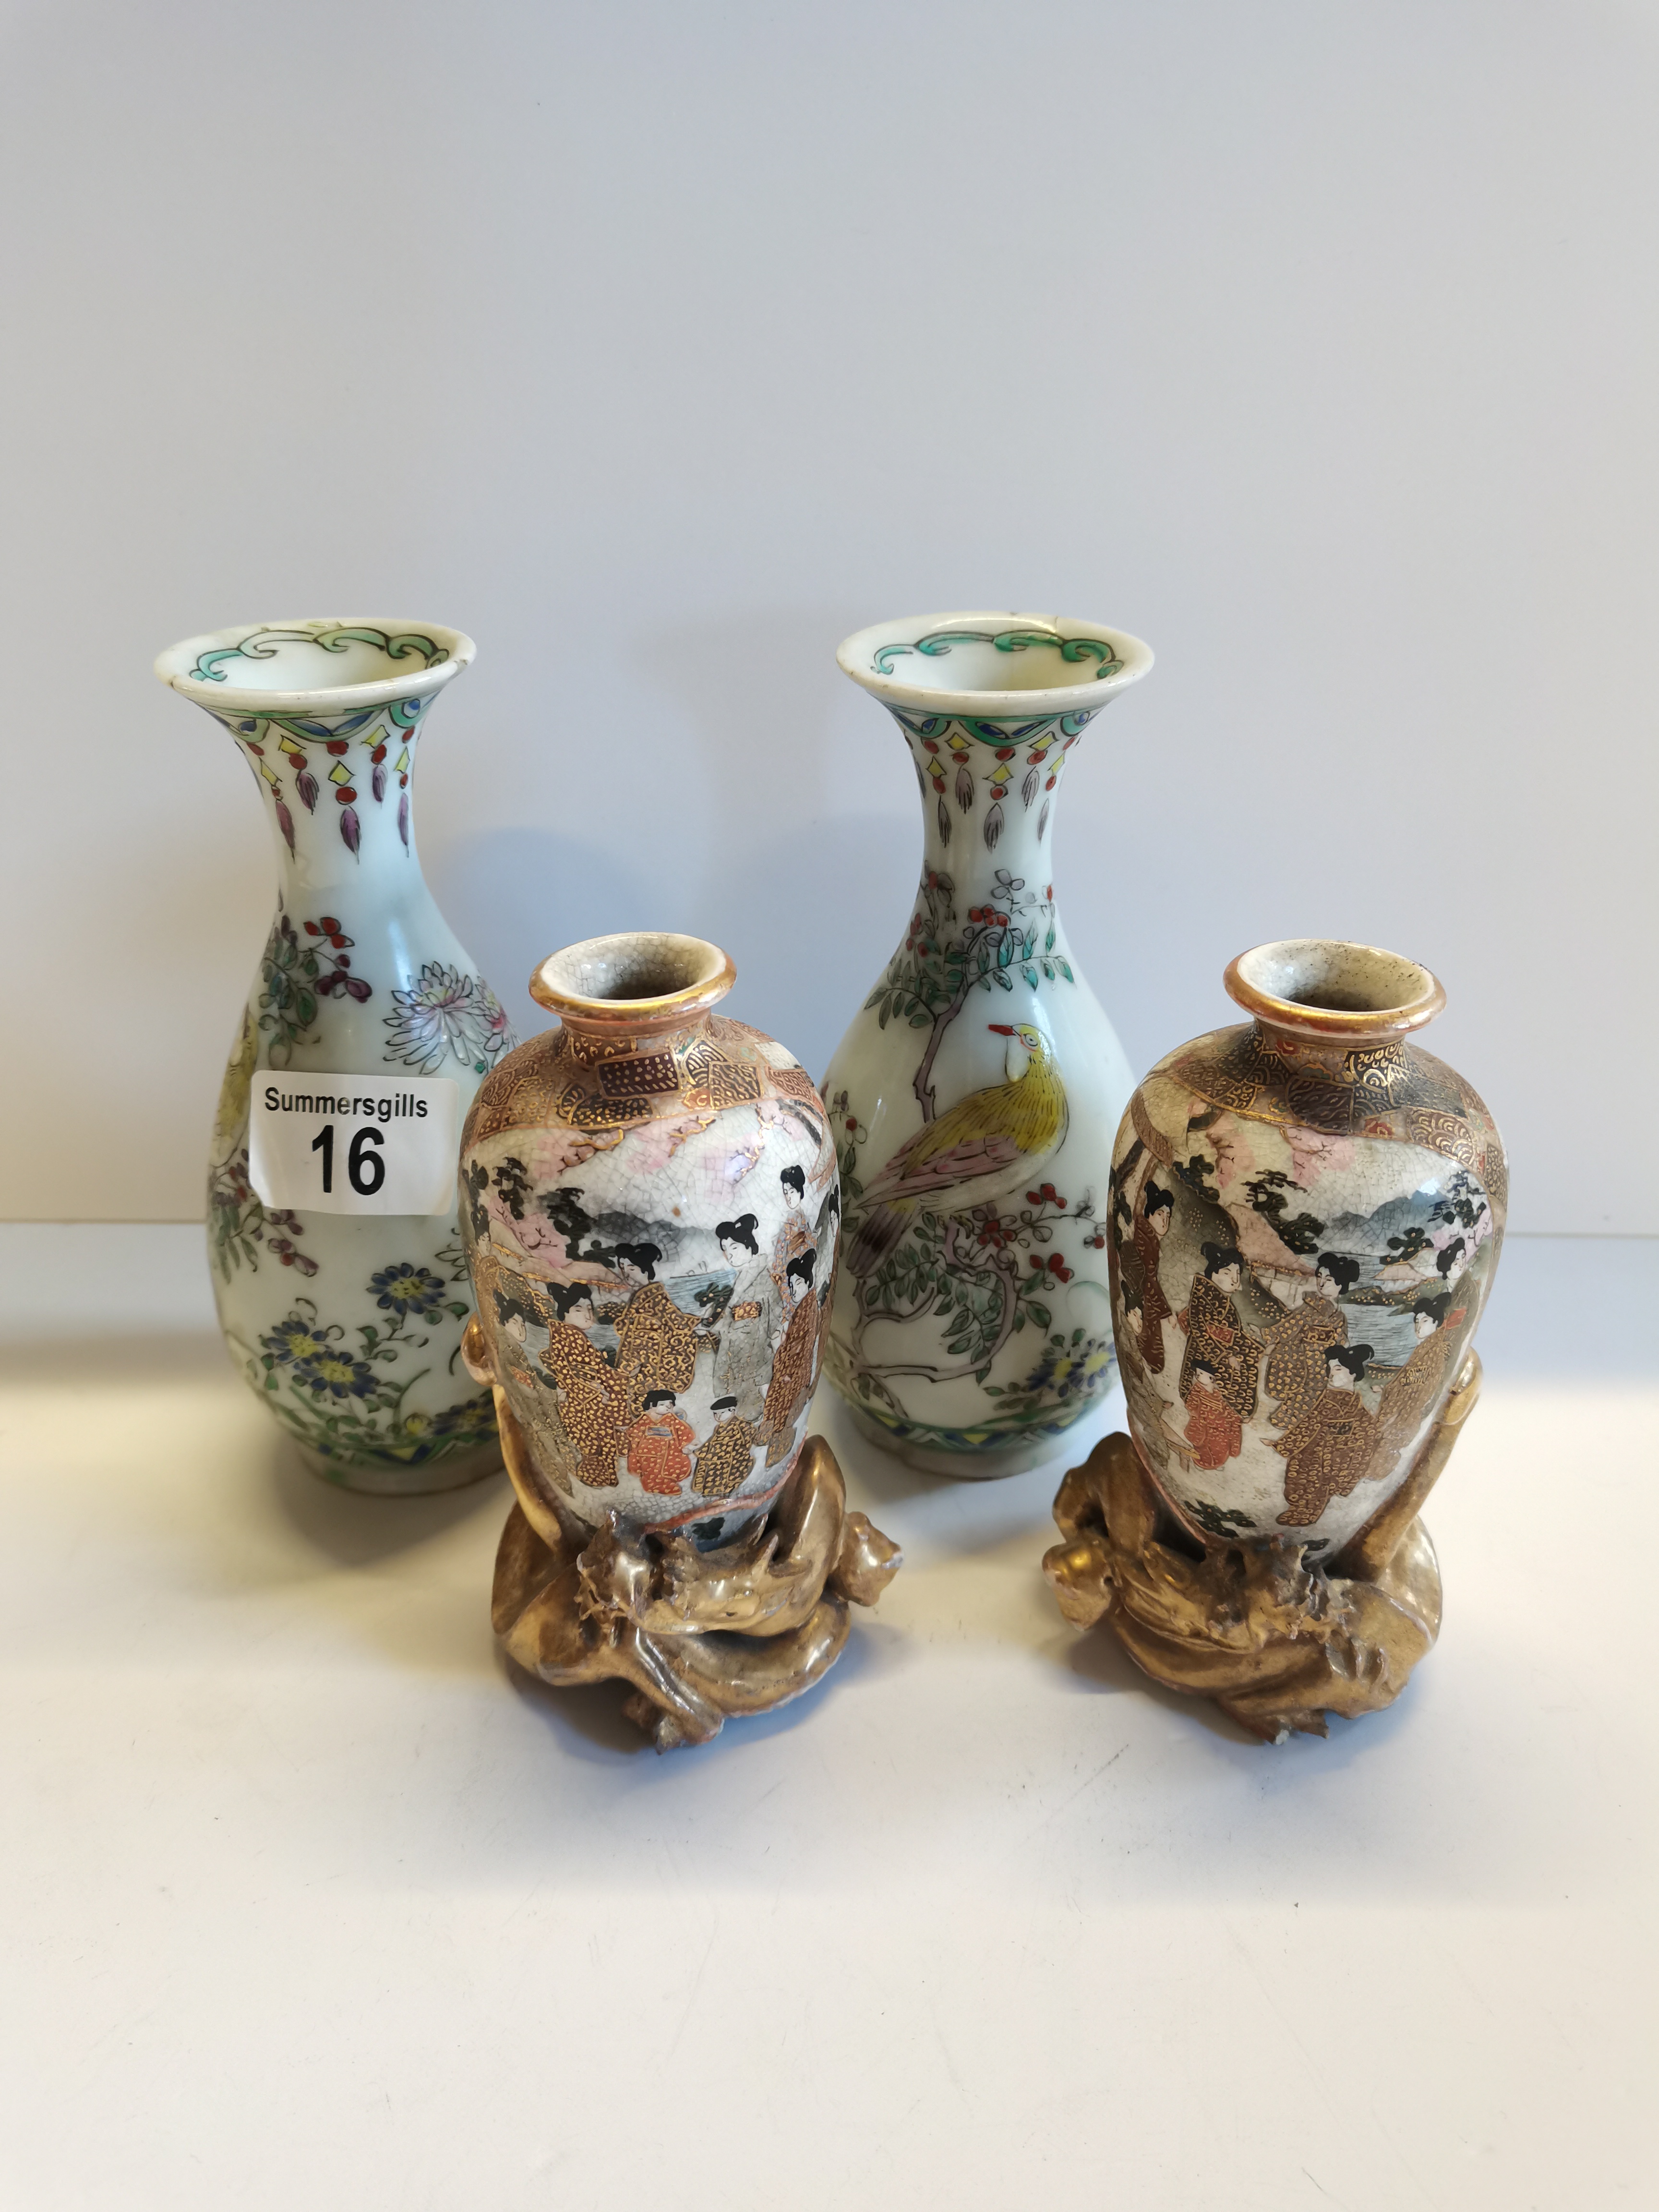 X2 pairs of Chinese vases. Slight damage to tallest pair